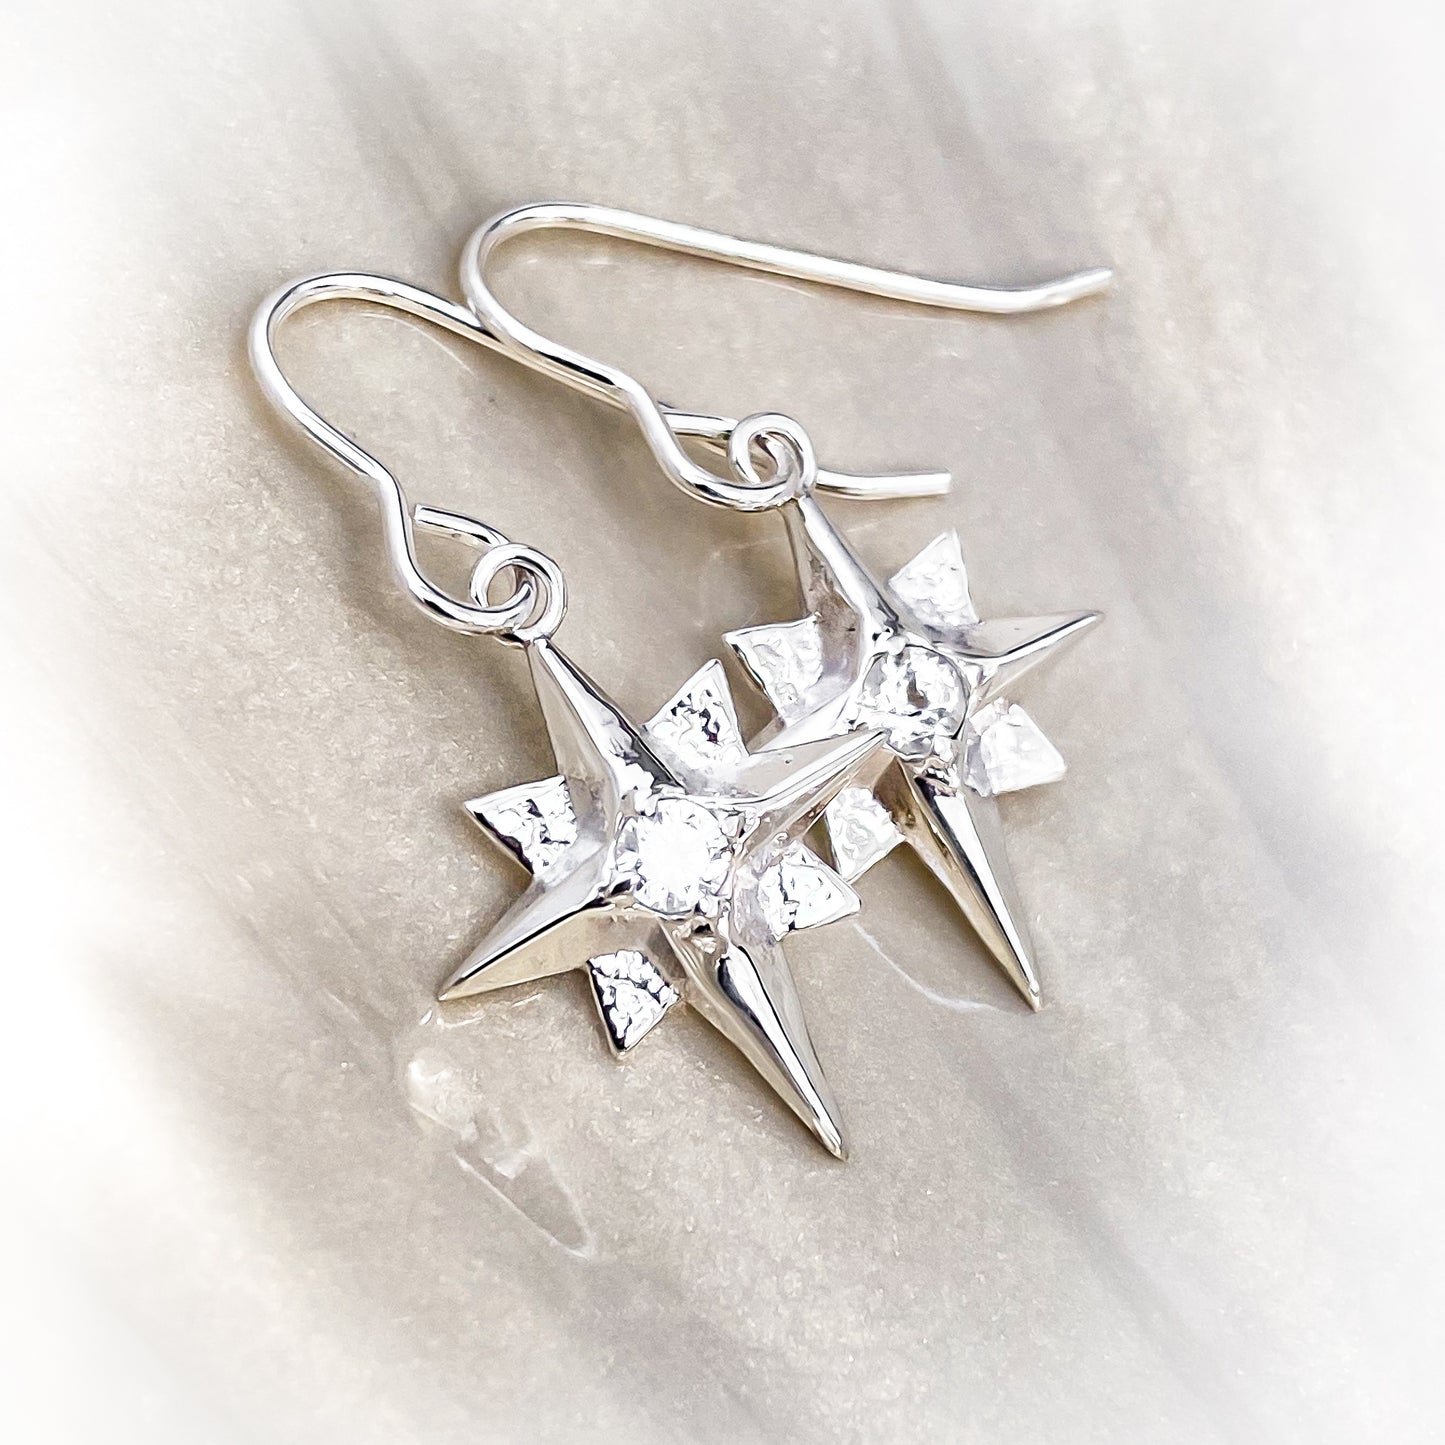 North Star Sterling Silver Earrings with White Topaz